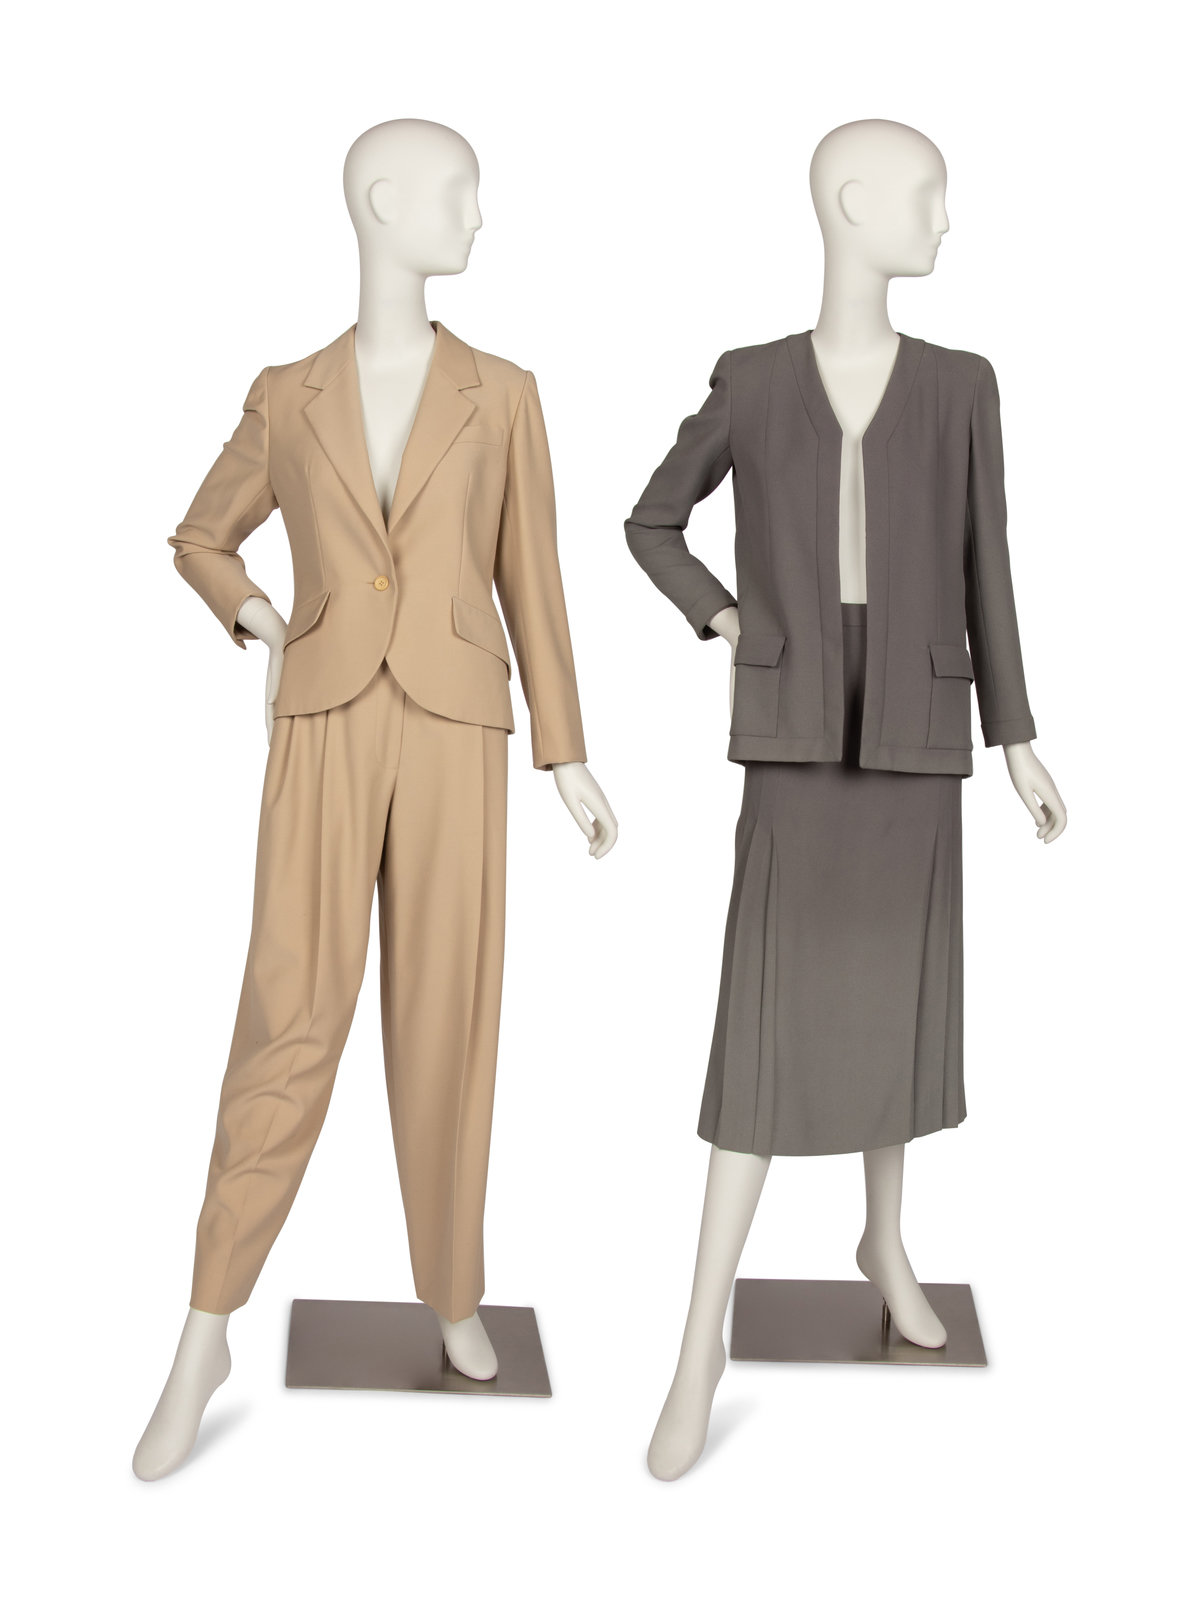 Two Christian Dior Haute Couture Suits, 1989-2003